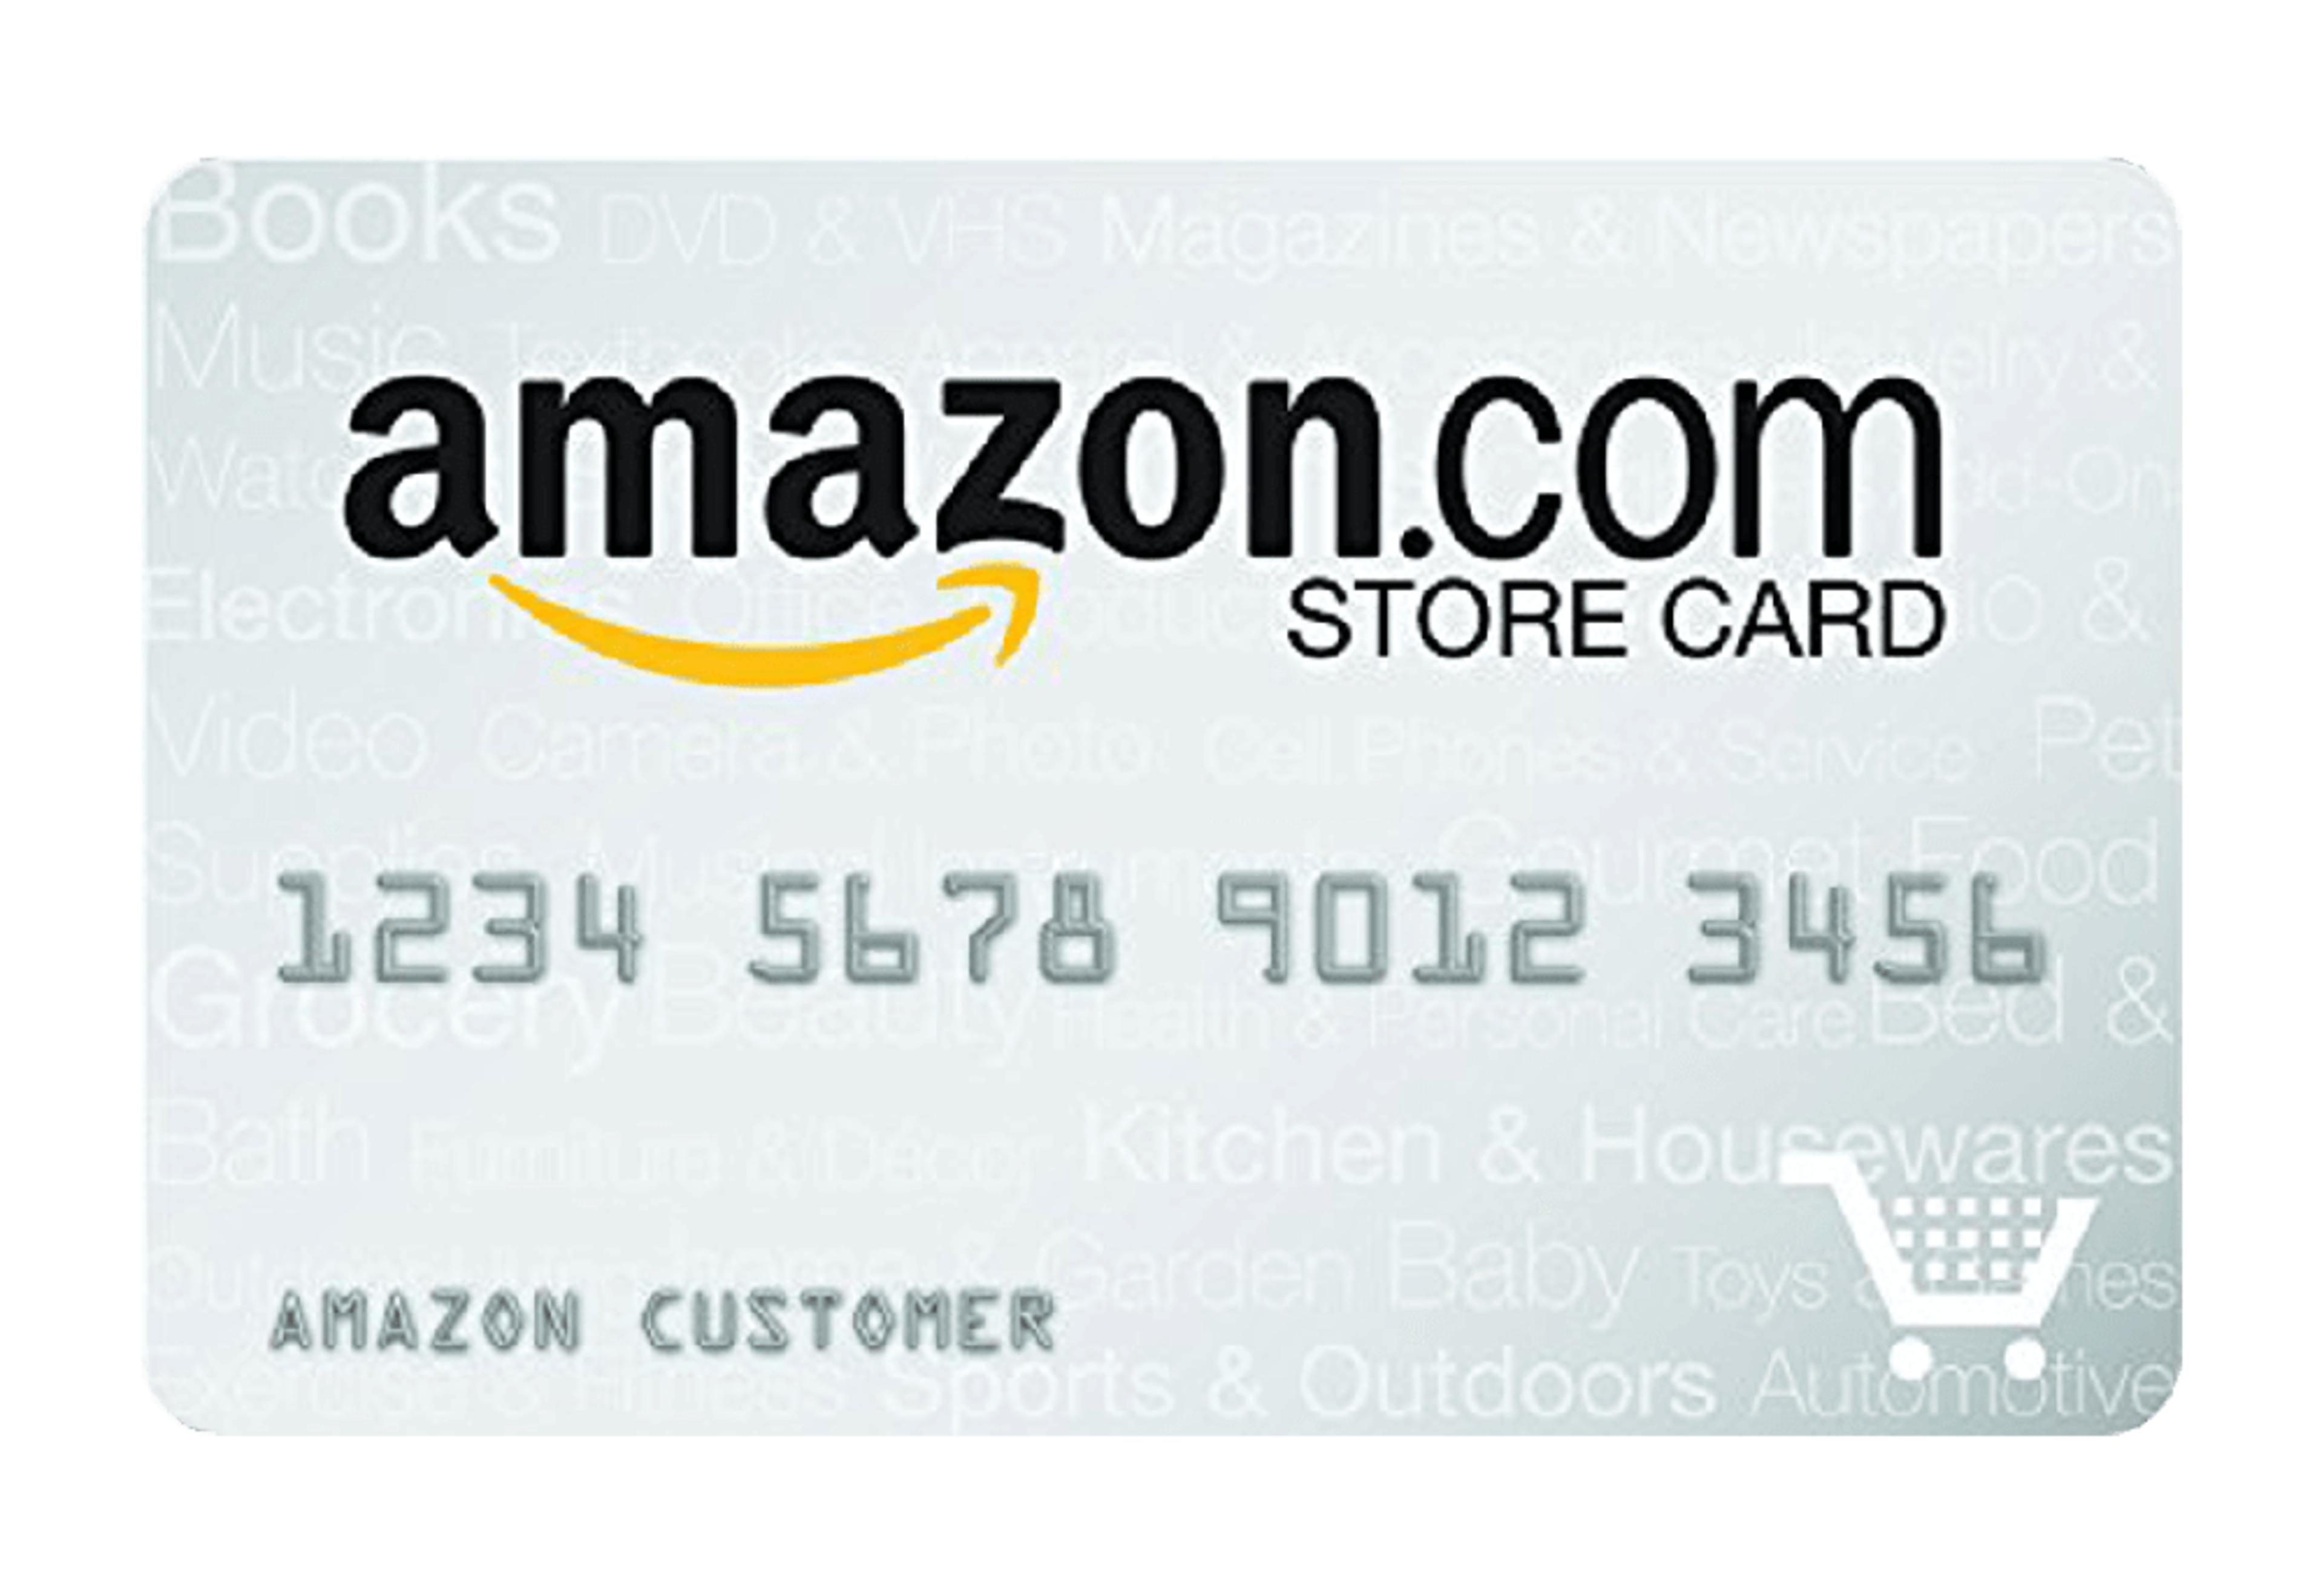 Amazon Prime Store Card Managed by Tally.